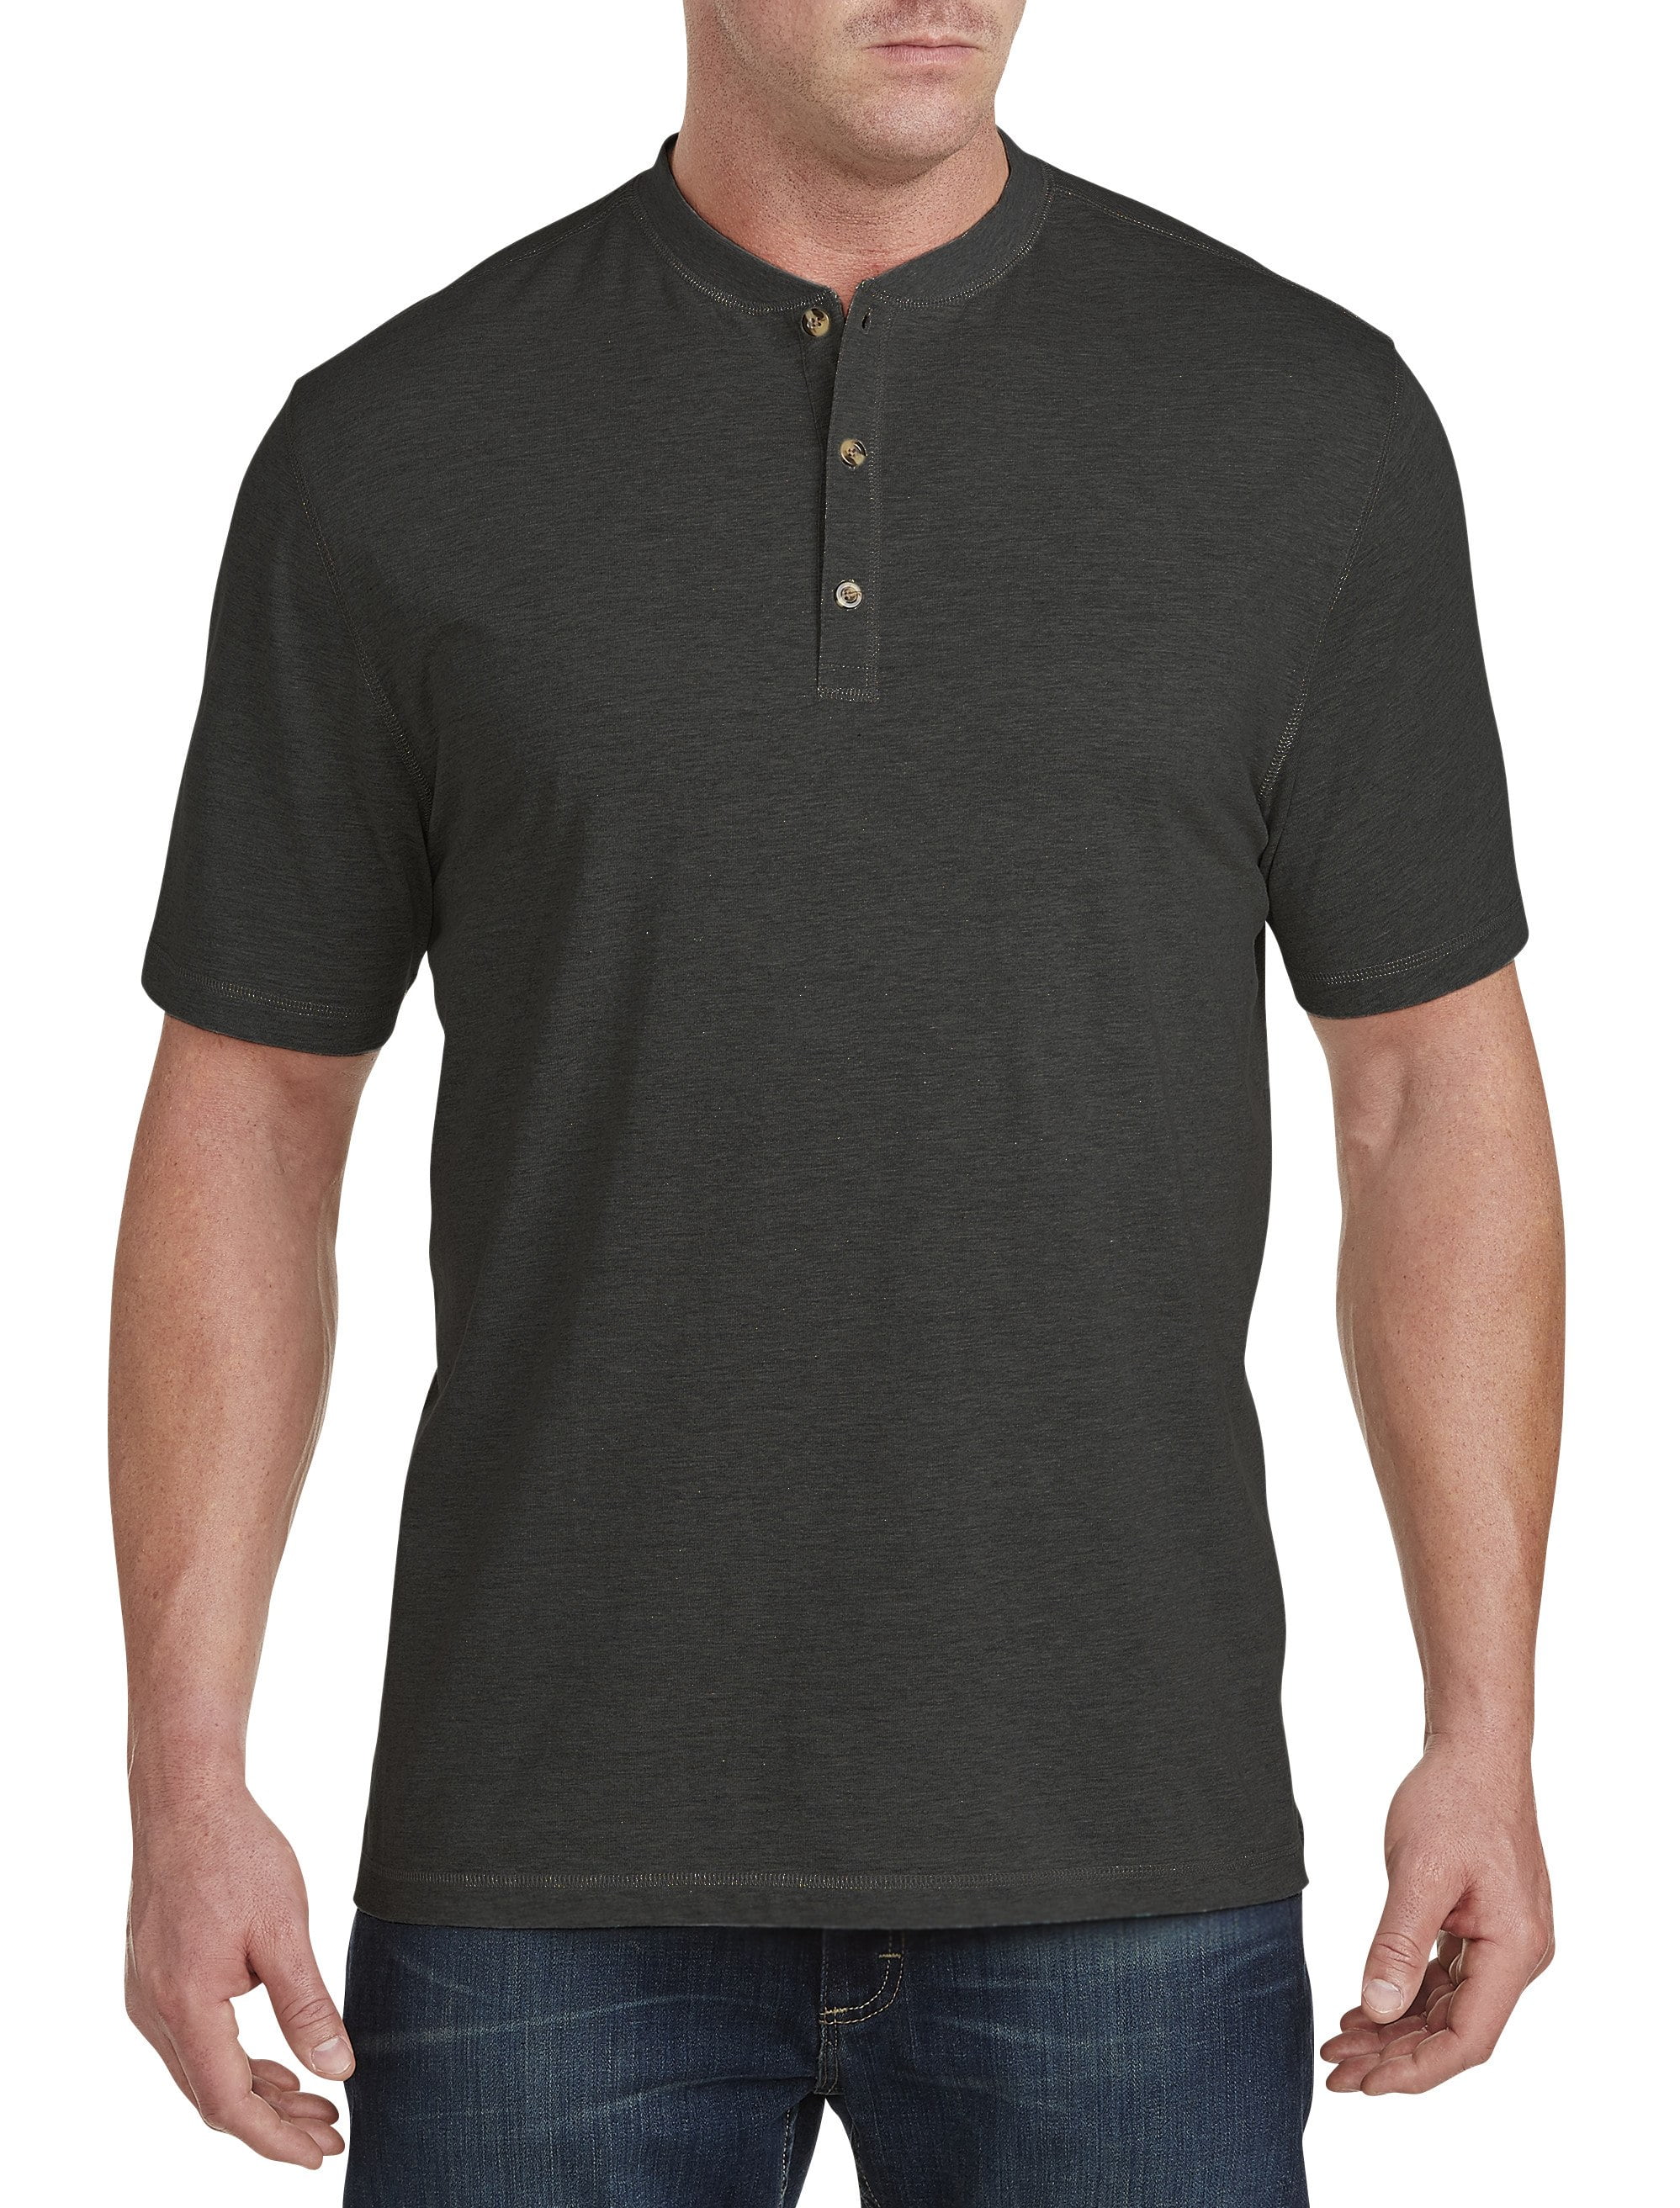 Harbor Bay by DXL Big and Tall Men's Wicking Jesery Henley Shirt ...